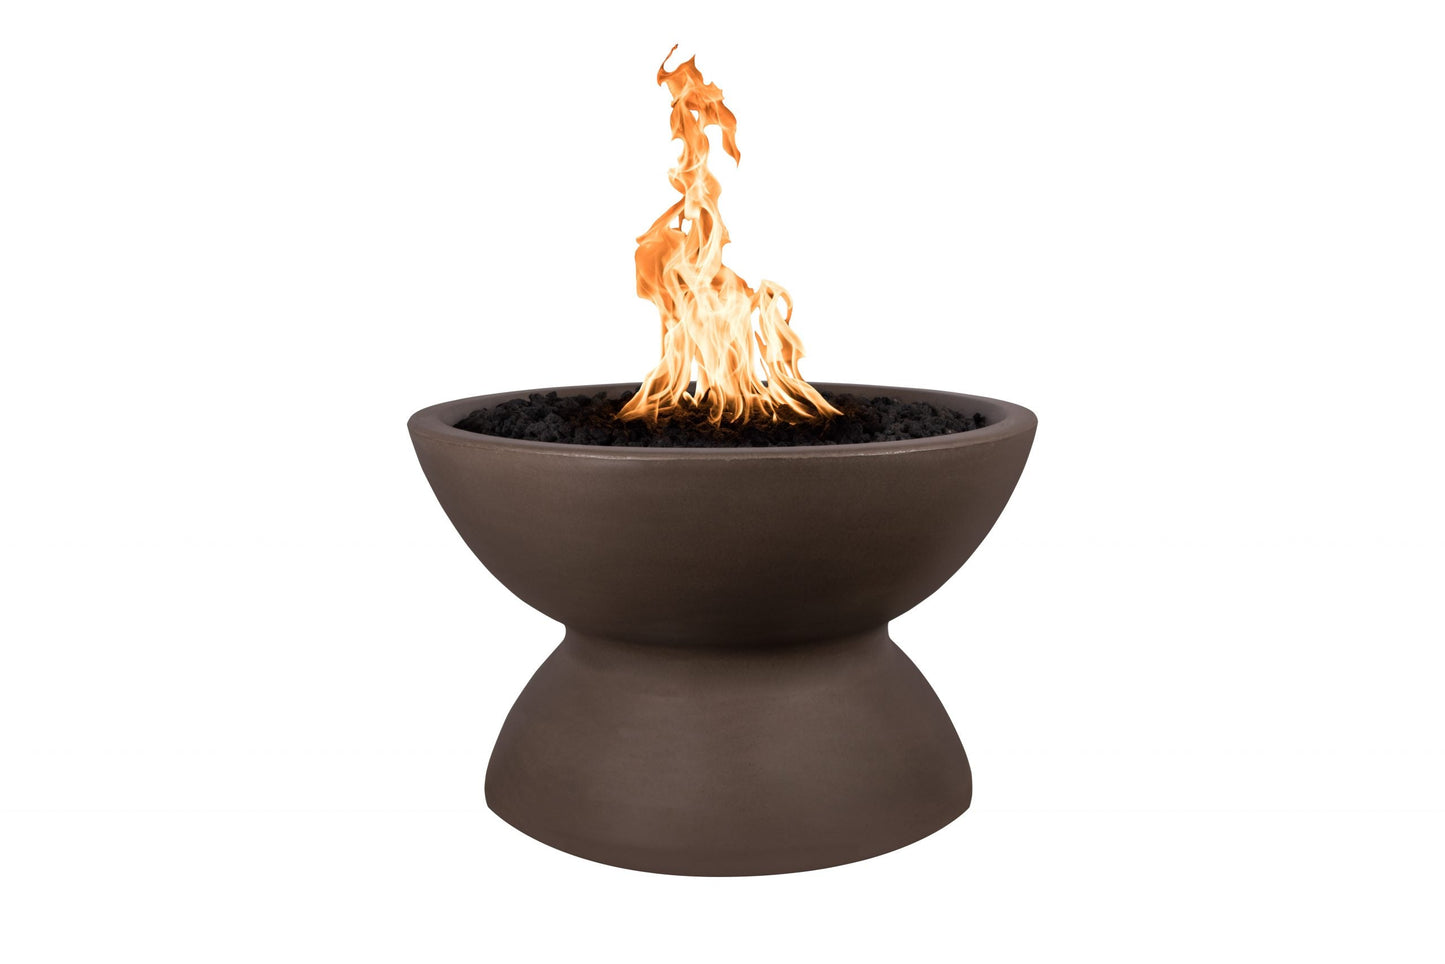 The Outdoor Plus Round Copa 33" Vanilla GFRC Concrete Liquid Propane Fire Pit with 110V Electronic Ignition